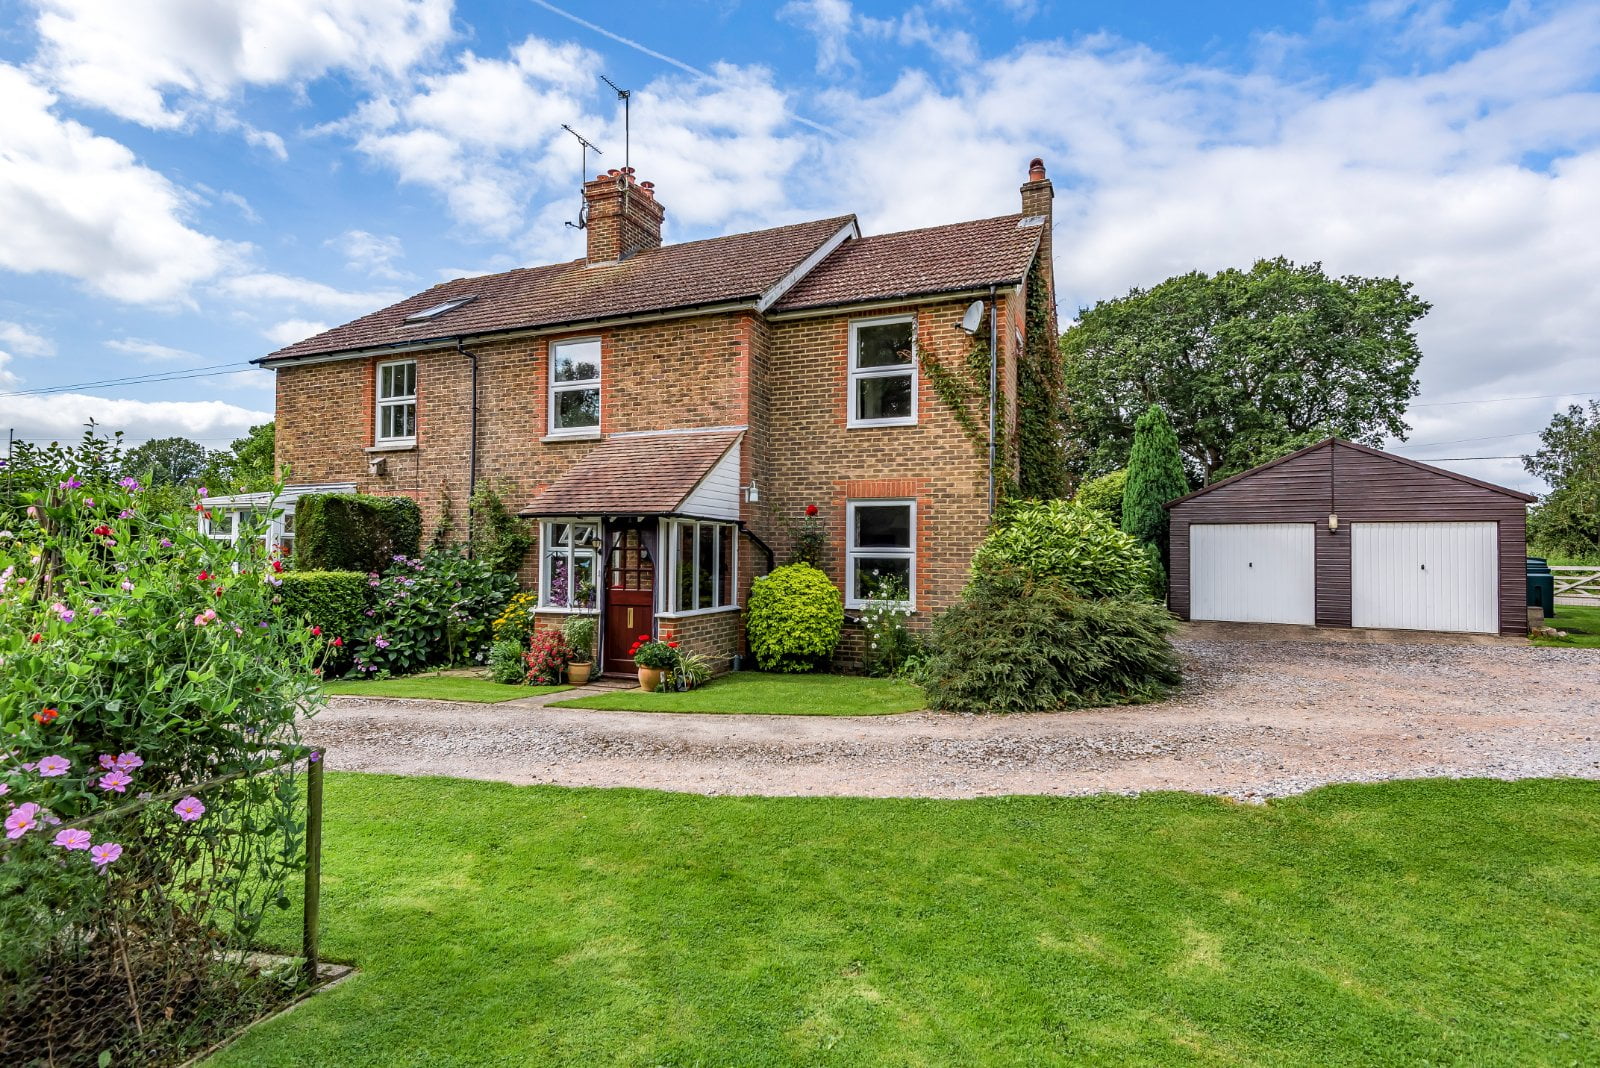 North Common Road, Wivelsfield Green, Haywards Heath,  | residential-sales